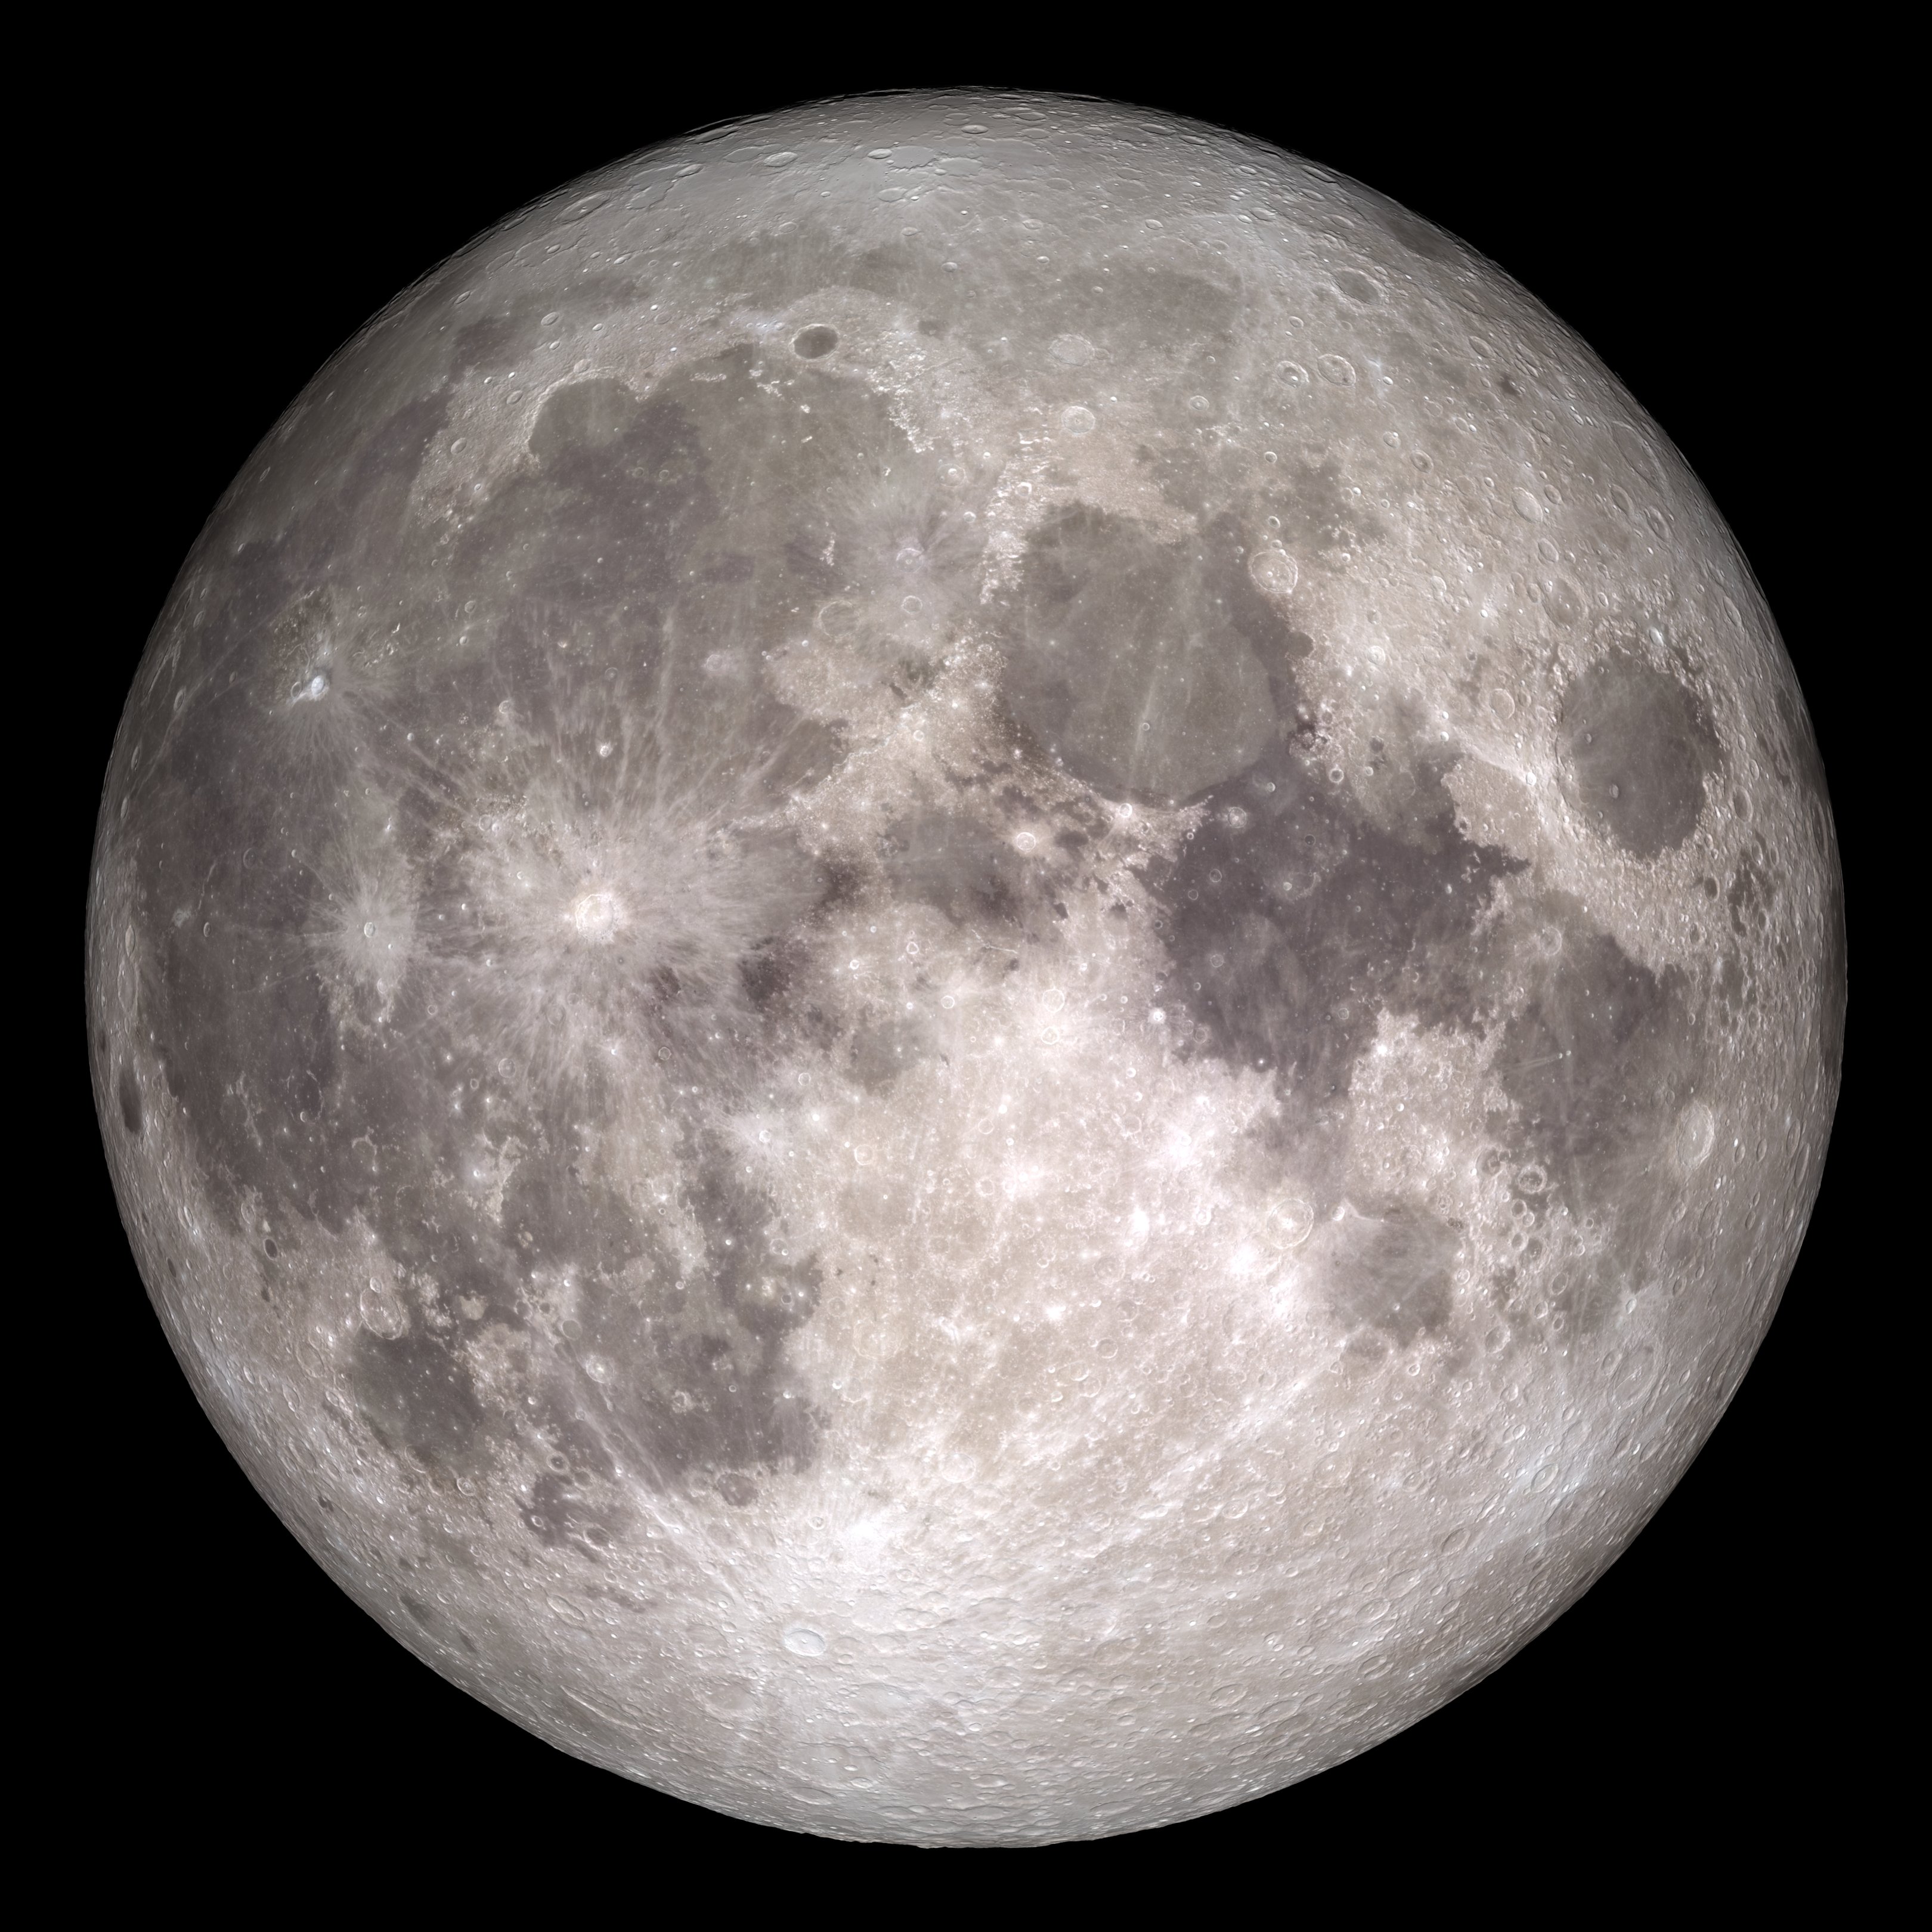 Full Moon in detail, with dark grey "seas" of cooled lava, bright highlands, sharp-edged craters, and rays of whitish impact eject extending outward from some craters. 